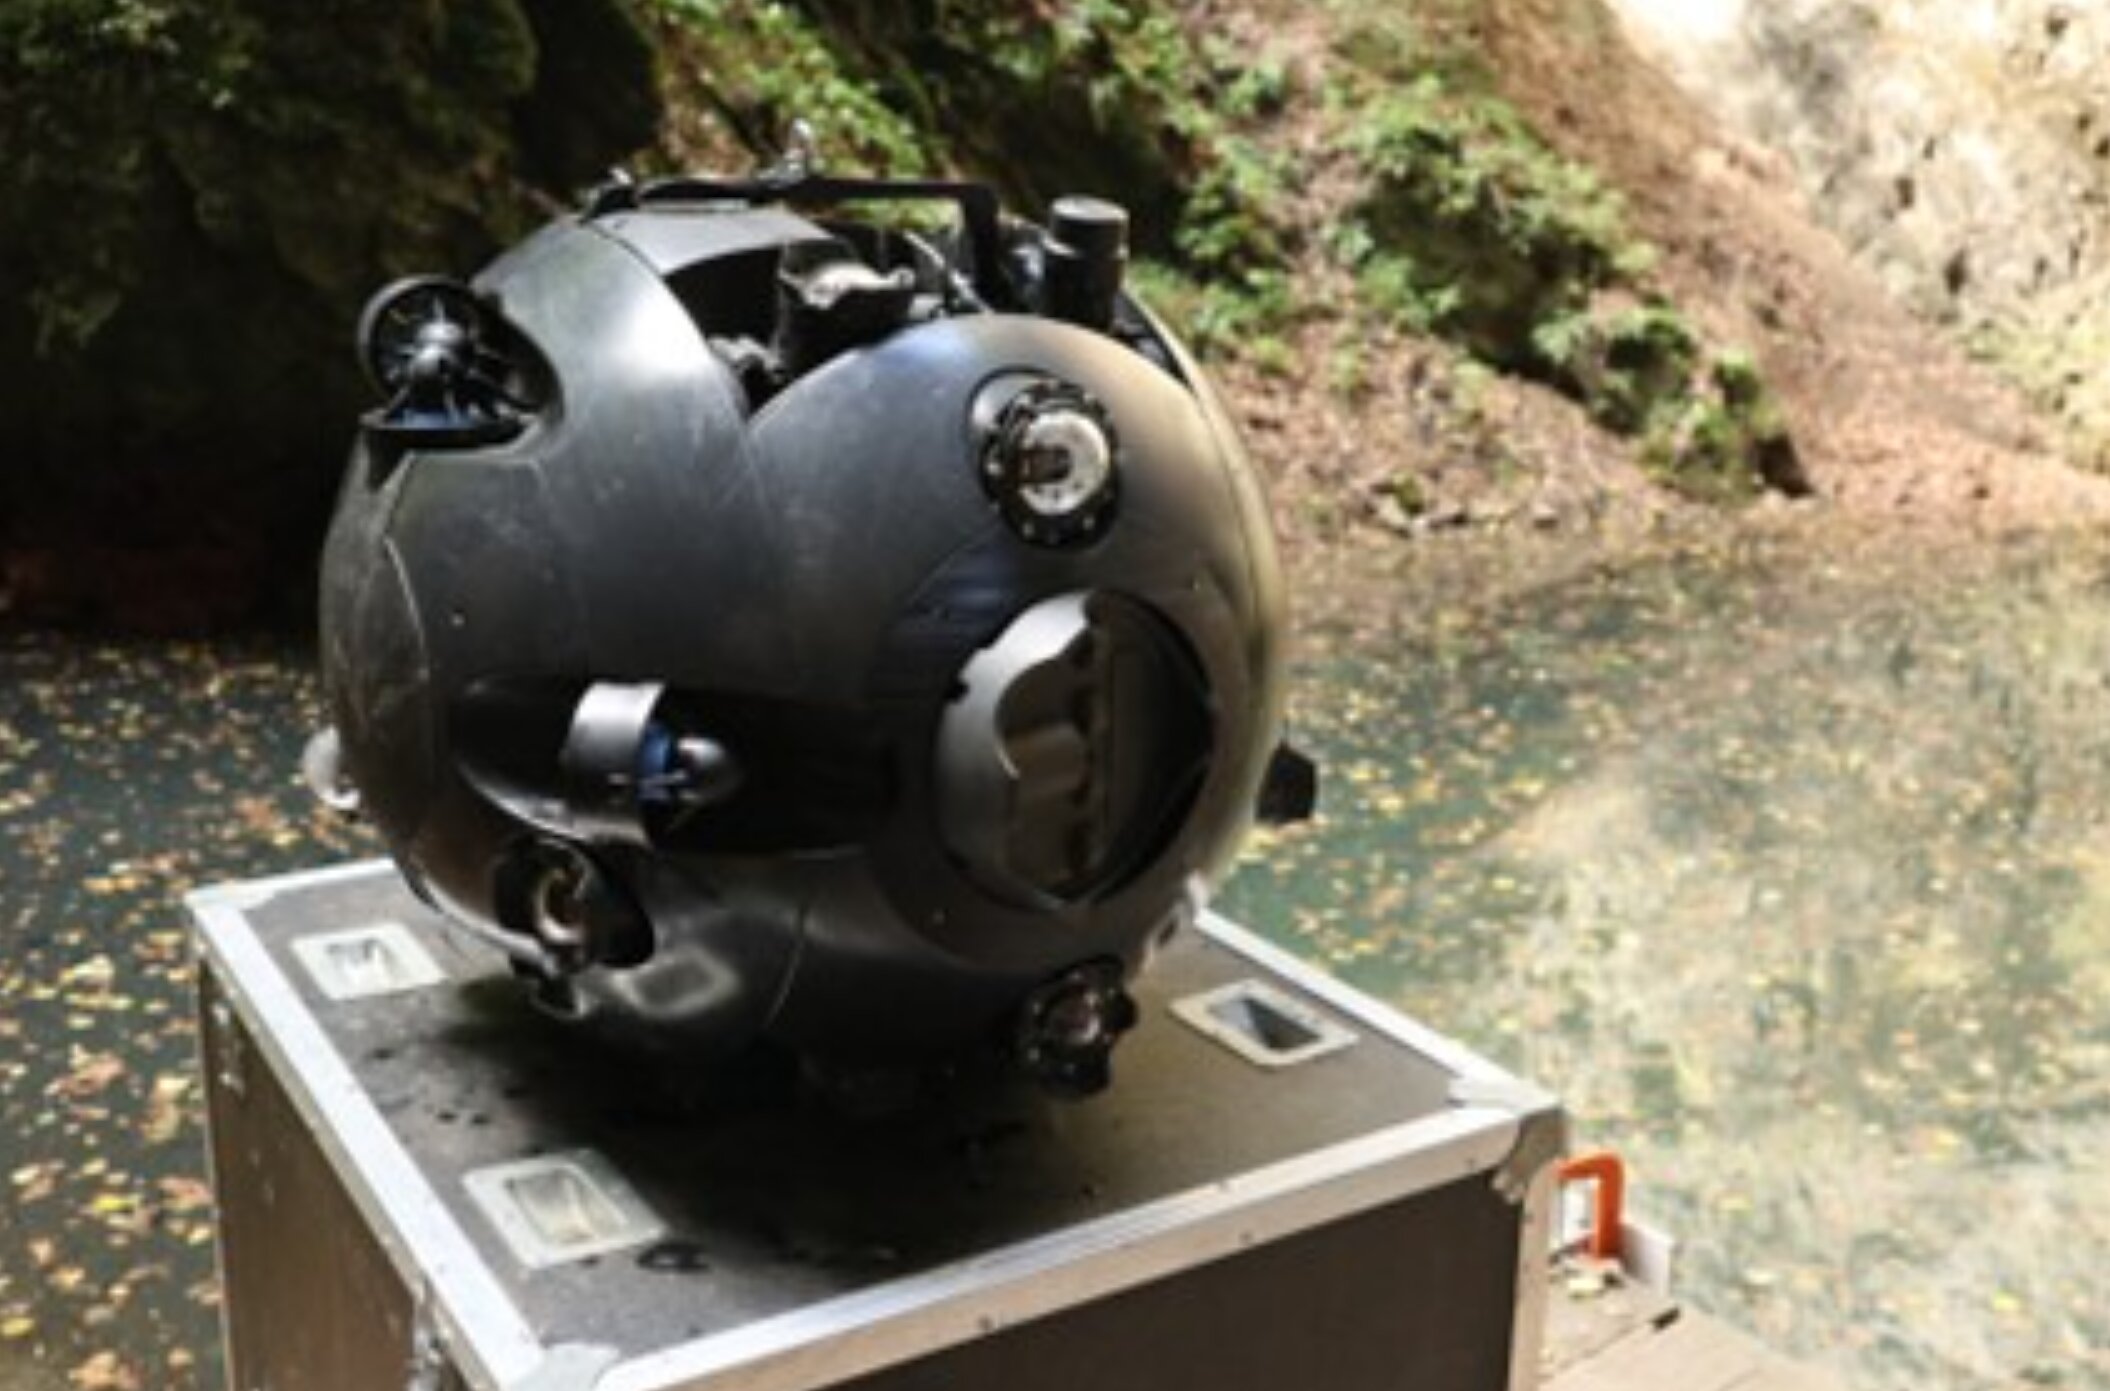 Robot helps researchers achieve a new record at the world’s deepest cave pit